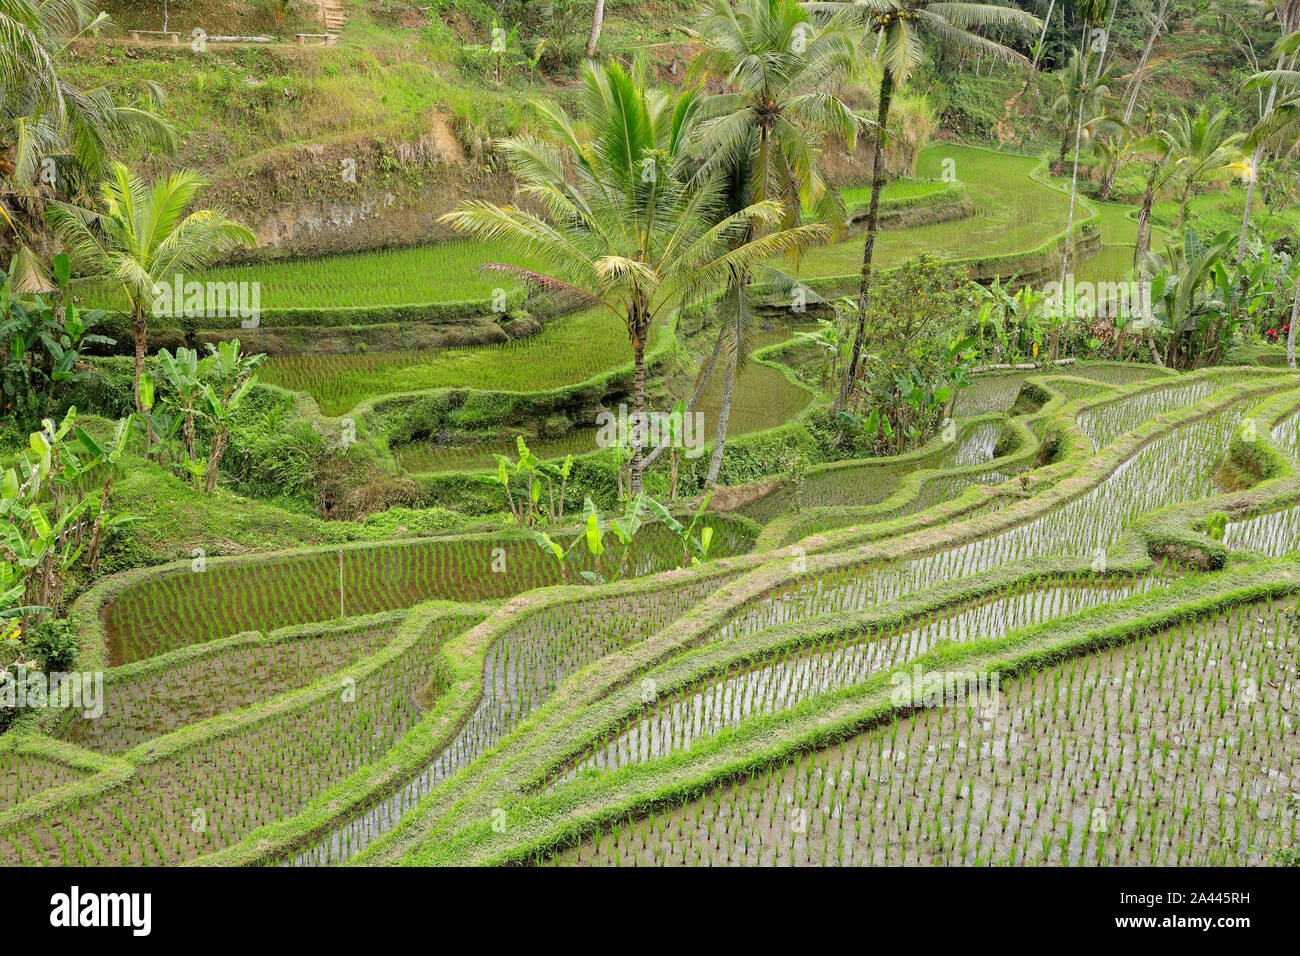 Scenic view of the lush green Tegallalang rice terraces in Ubud, Bali, Indonesia Stock Photo